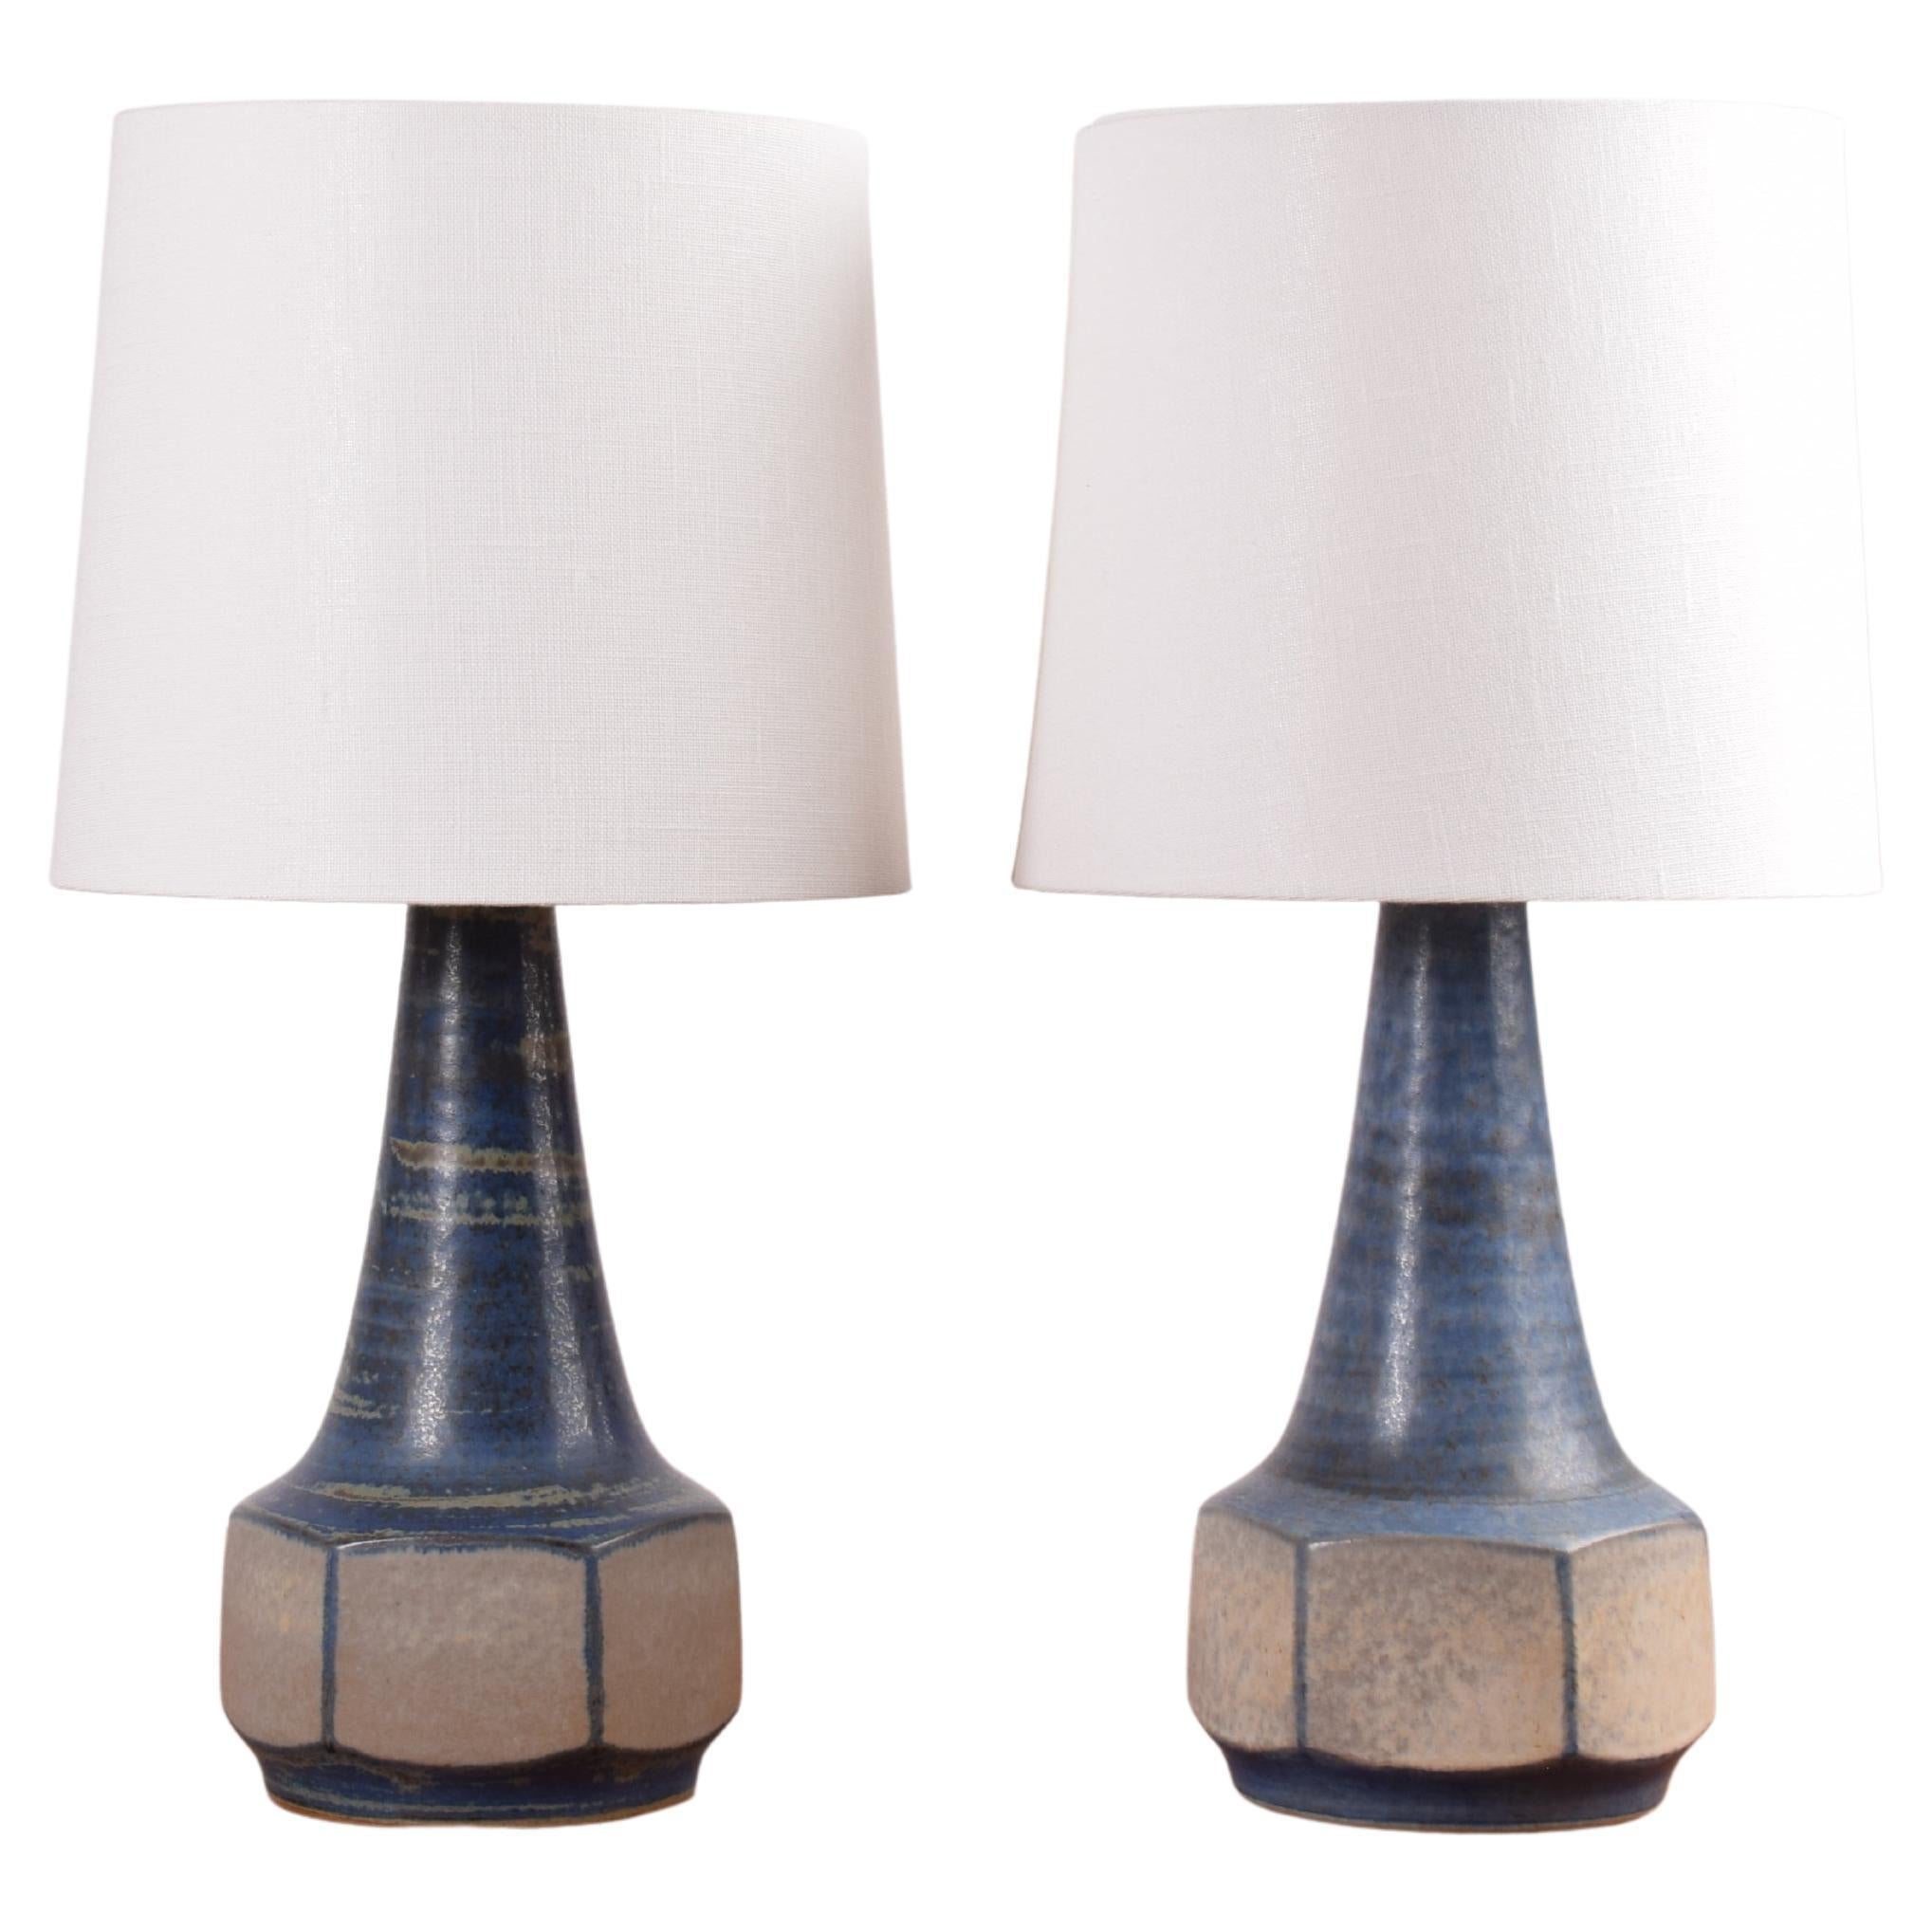 Pair of Marianne Starck for Michael Andersen Table Lamps Blue Gray, Danish 1960s For Sale